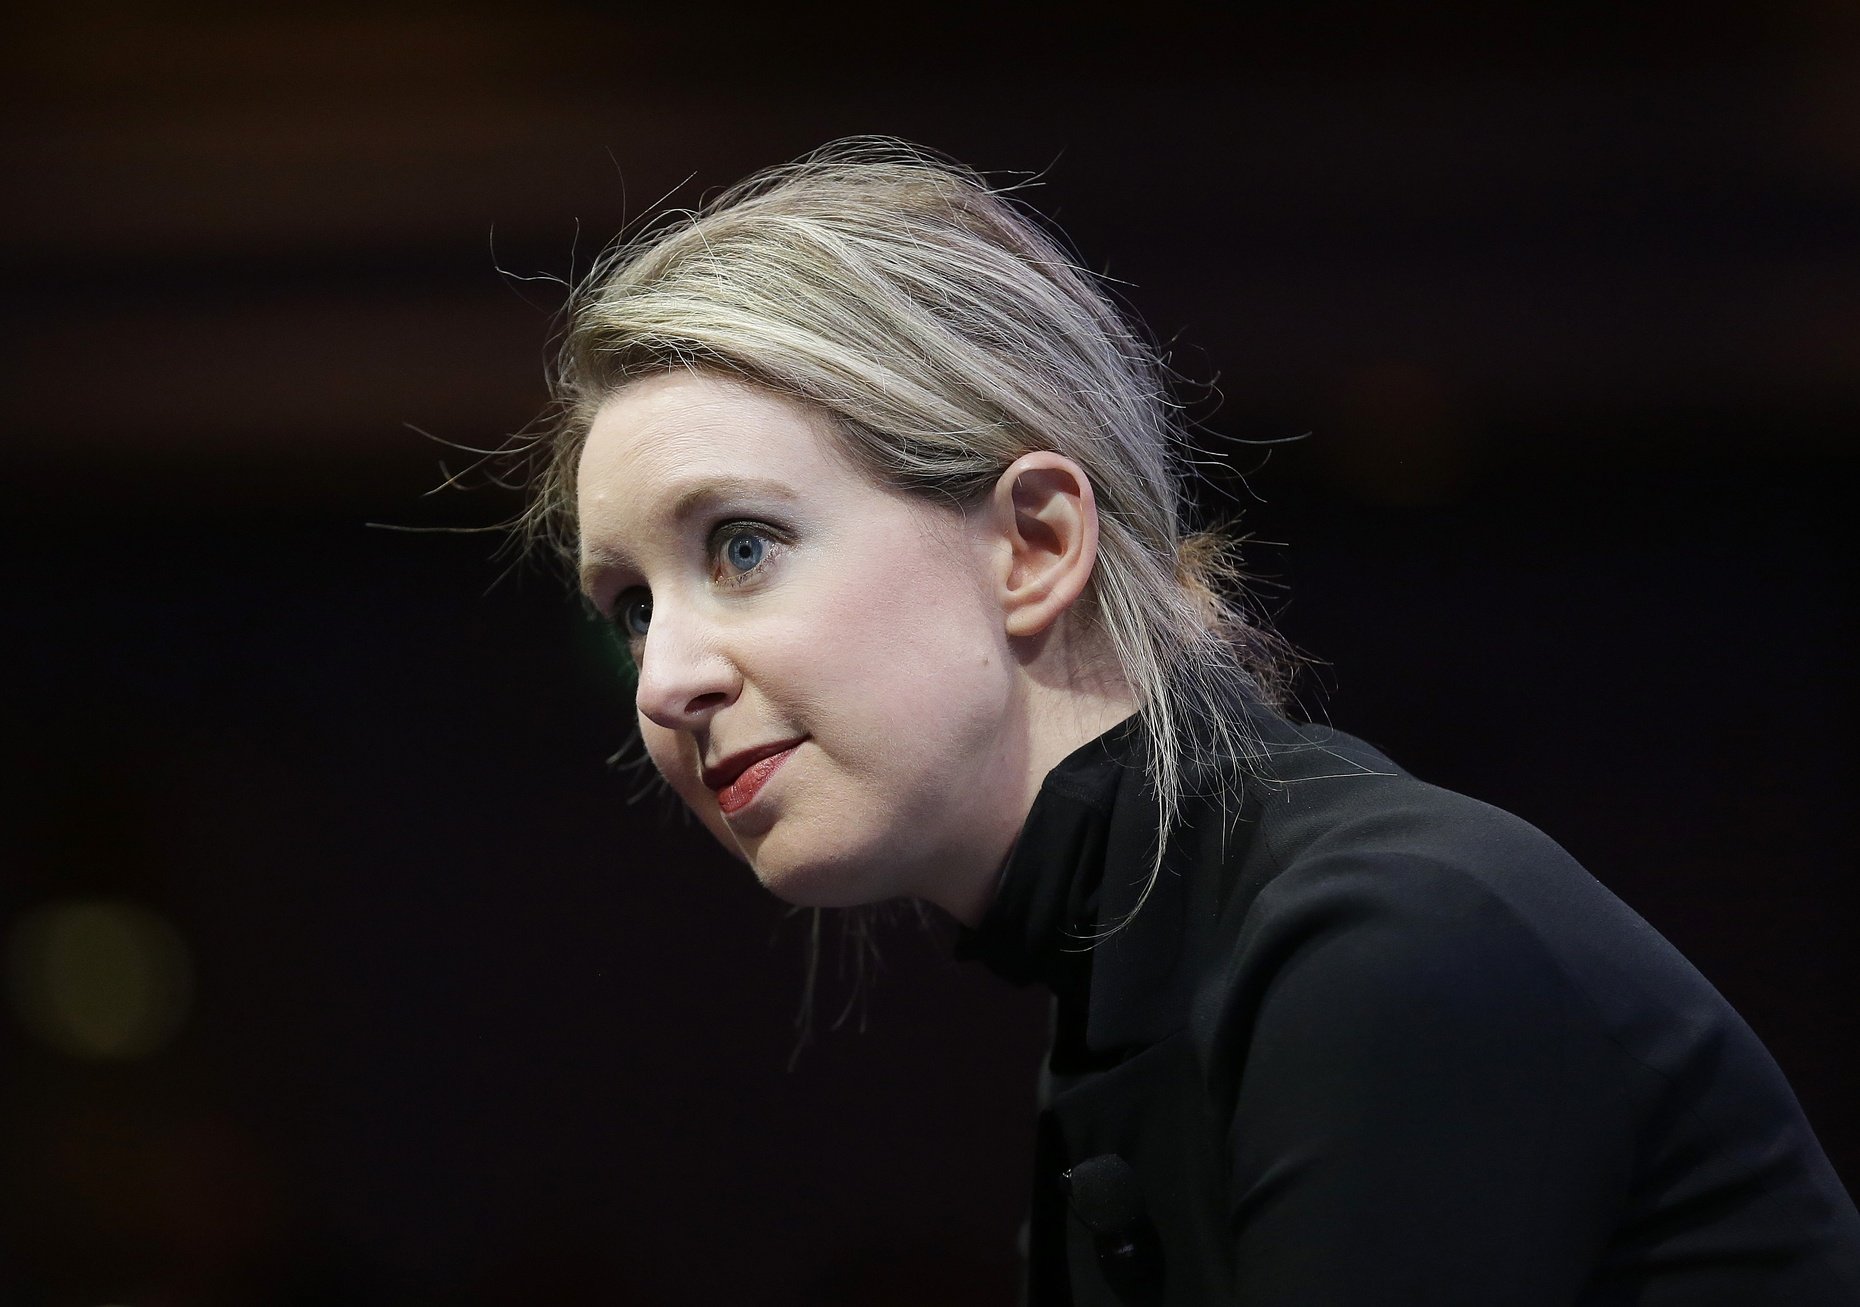 A podcast from WNYC about how a journalist broke the business model of Theranos, a blood testing technology company.